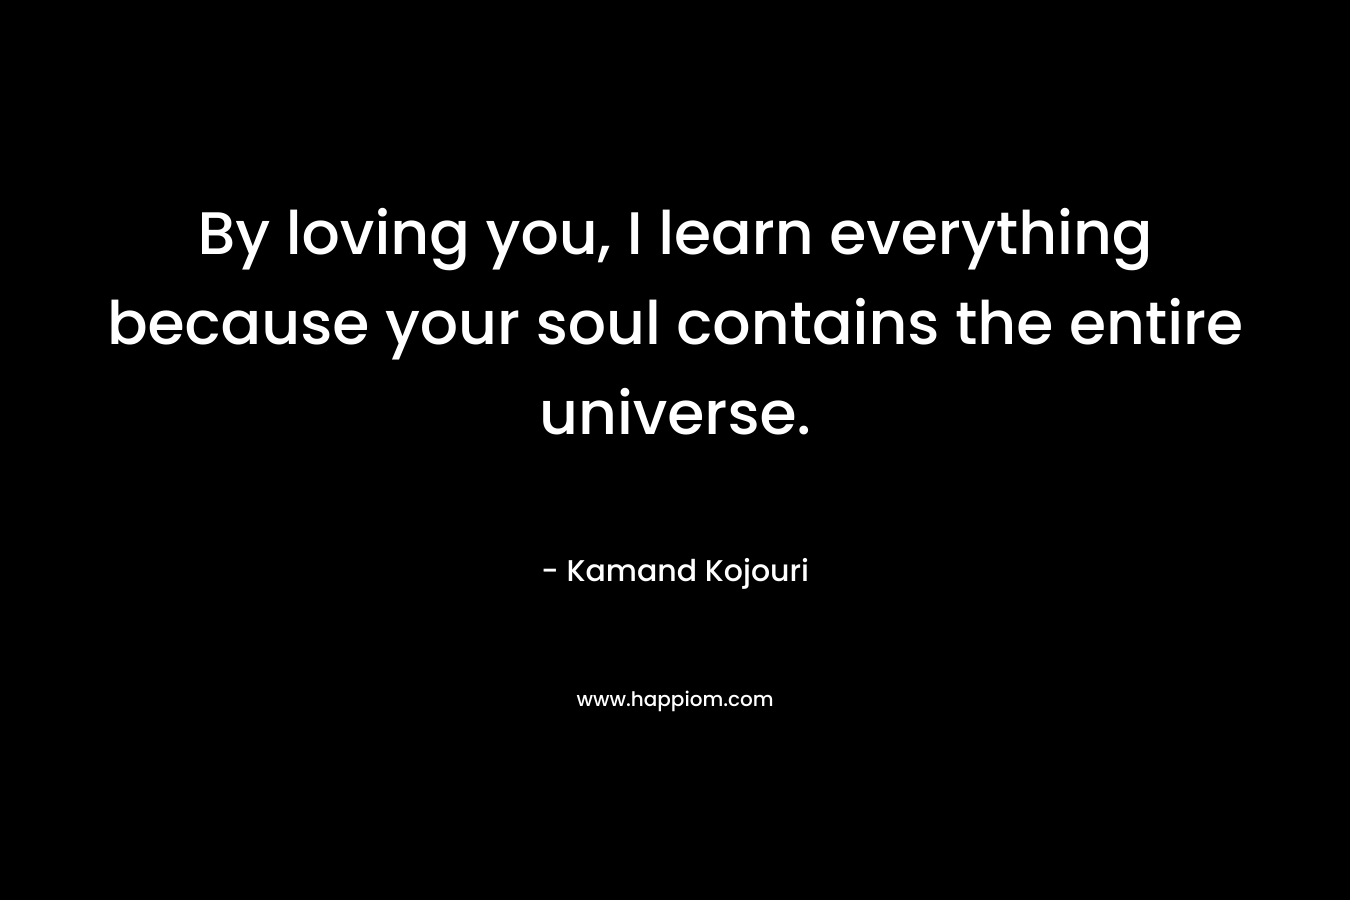 By loving you, I learn everything because your soul contains the entire universe.